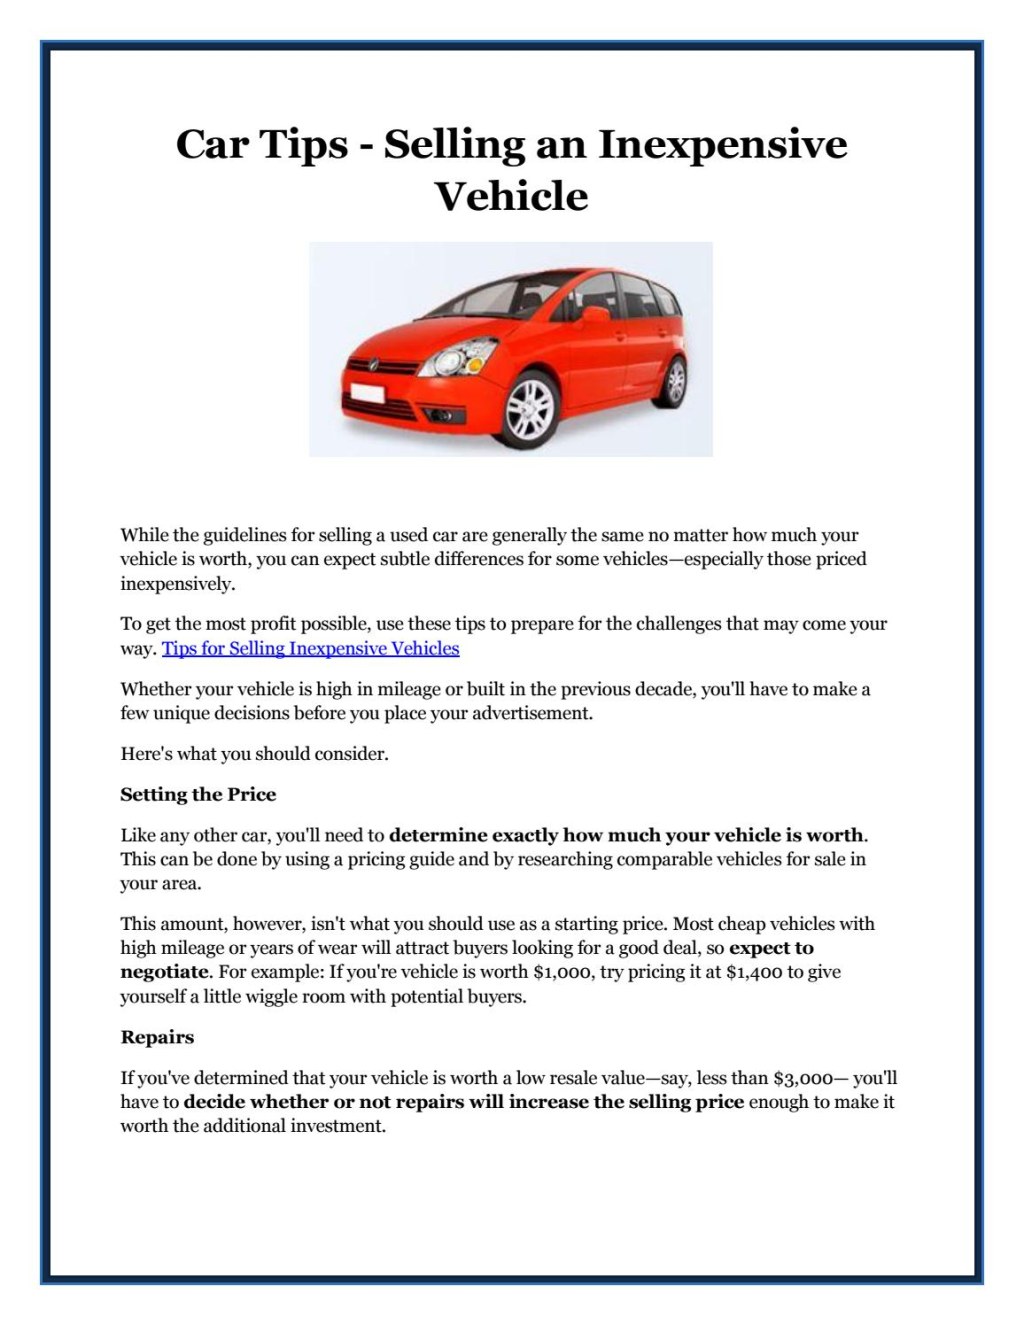 Picture of: Car Tips – Selling an Inexpensive Vehicle by Isobel Cartwright – Issuu